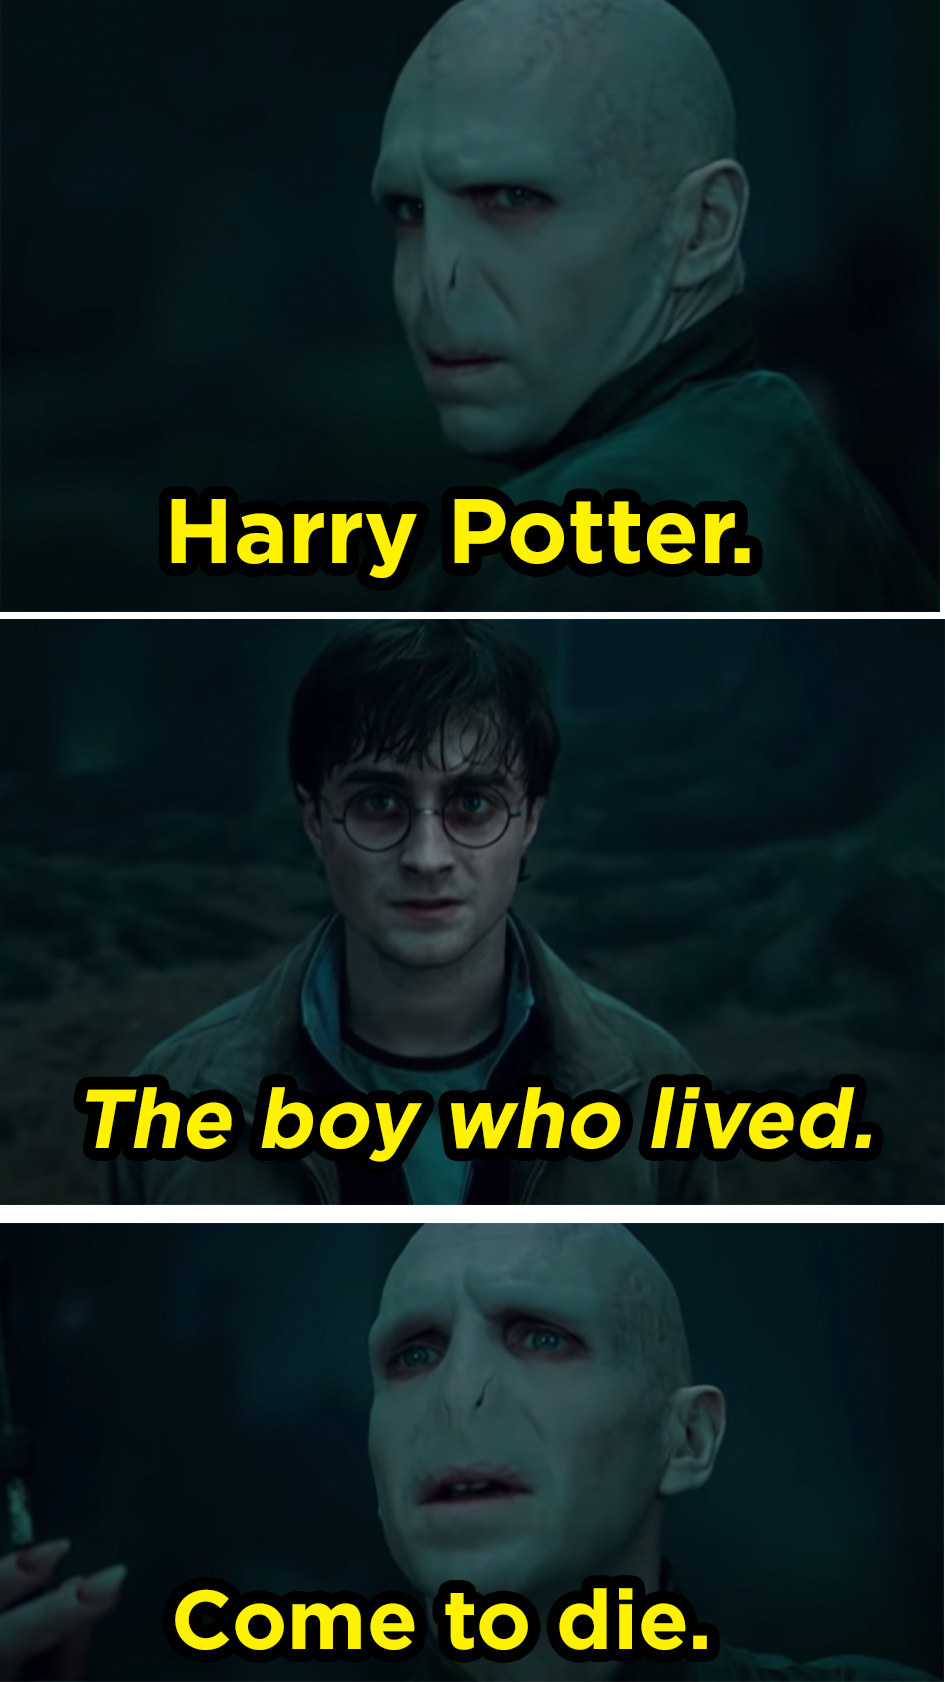 a bald man-creature with two slits for a nose stands in a forest. he says &quot;harry potter, the boy who lived, come to die.&quot;